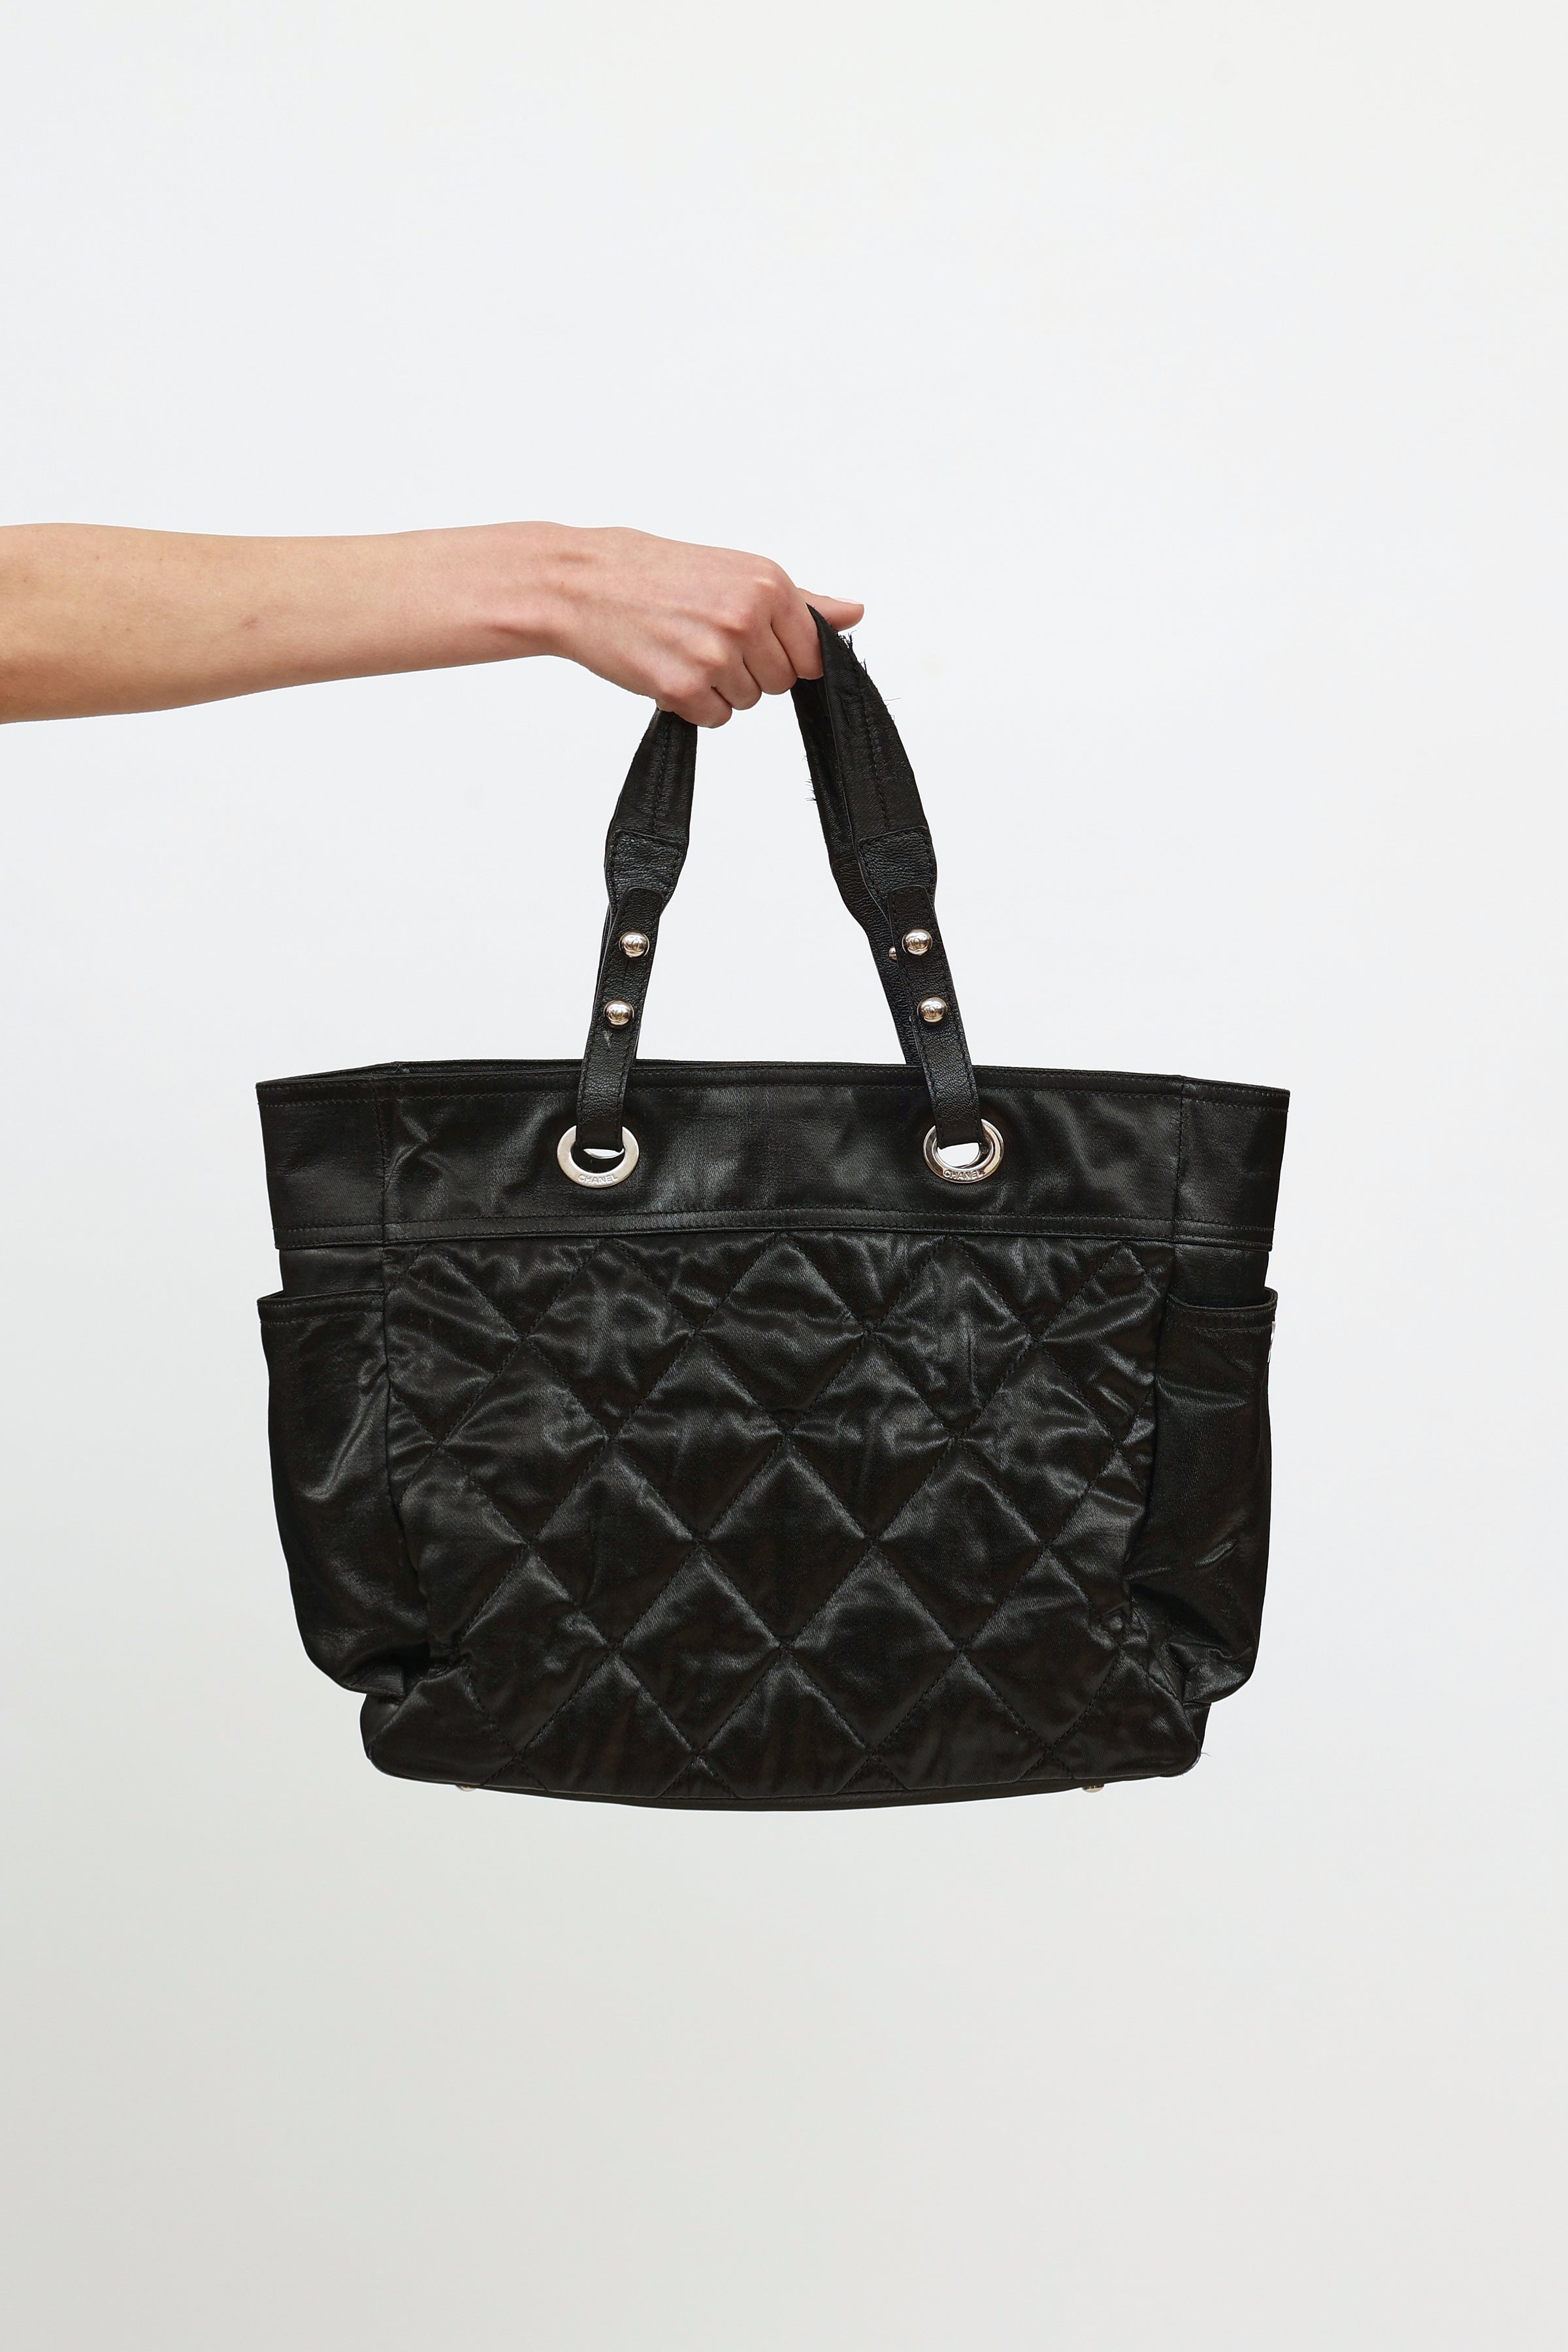 Chanel // Black Quilted Nylon Biarritz Tote Bag – VSP Consignment